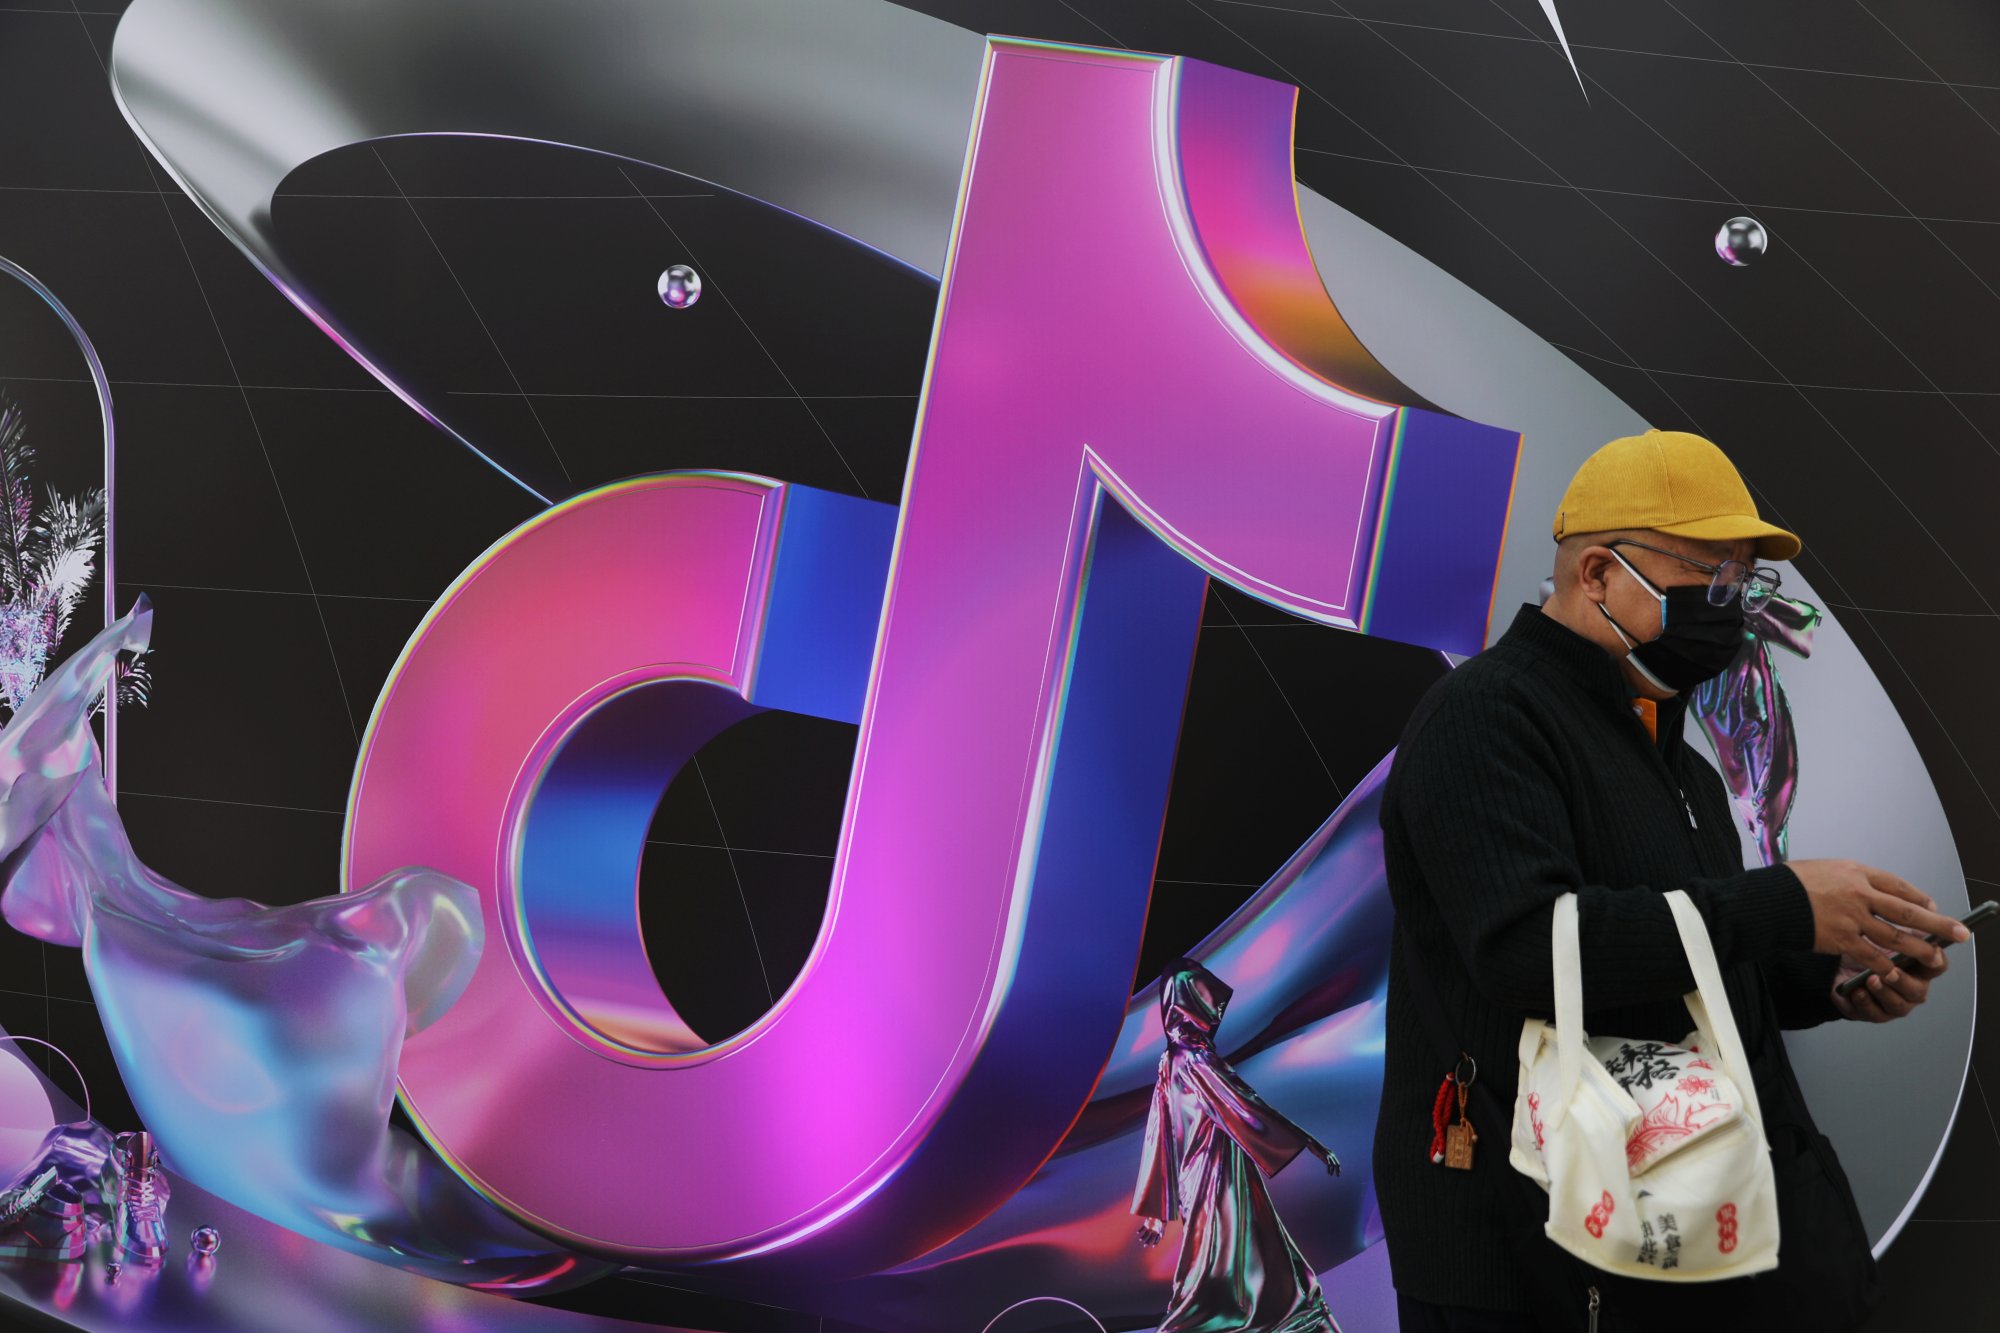 bytedance abandons tiktok-like e-commerce app as world’s most valuable unicorn pushes on with cost-cutting